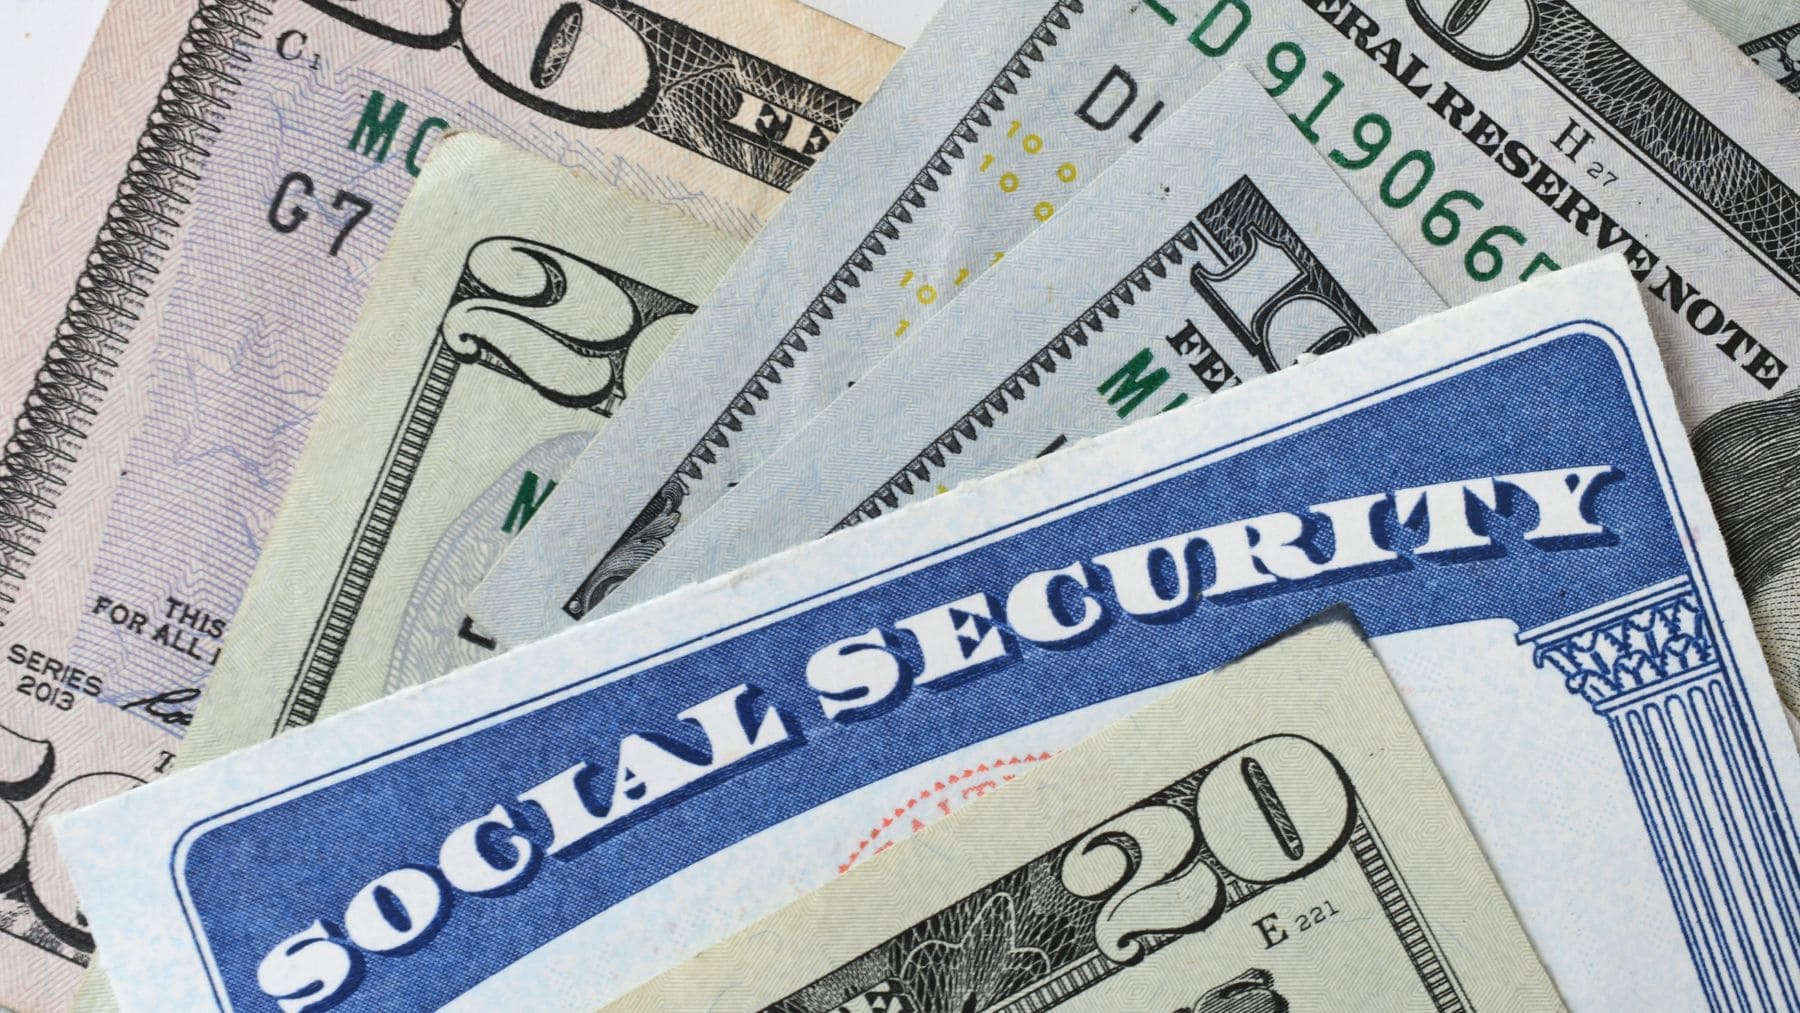 Money and card from Social Security